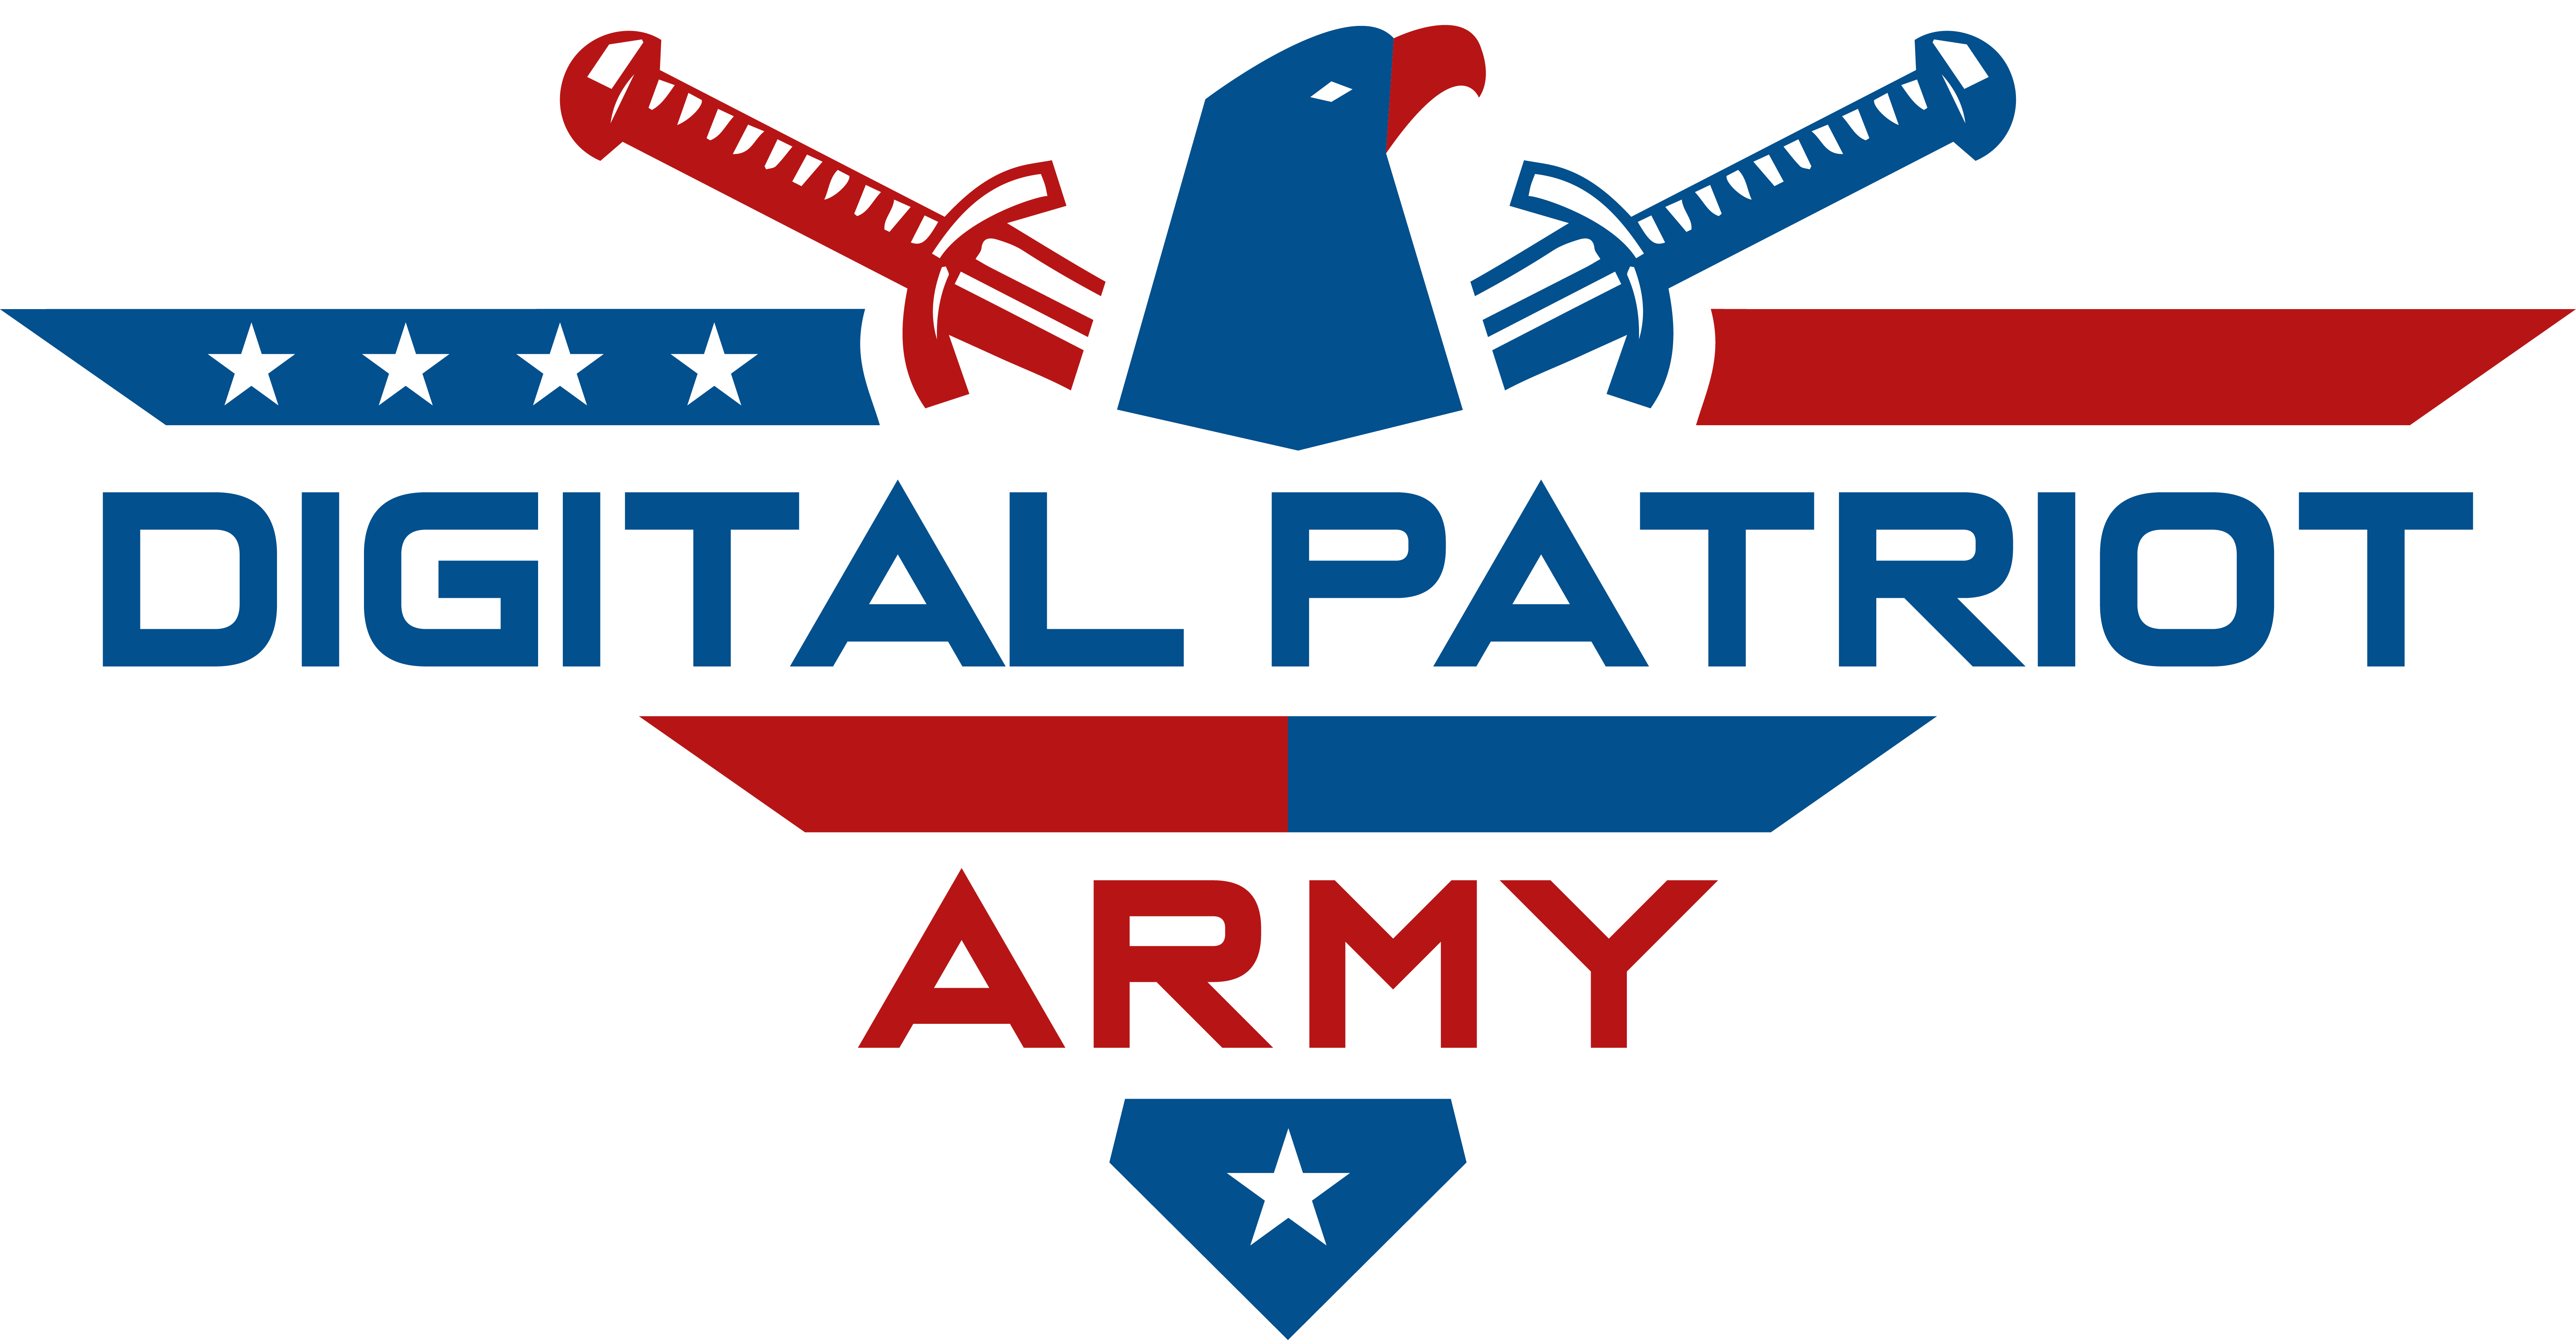 About Digital Patriot Army